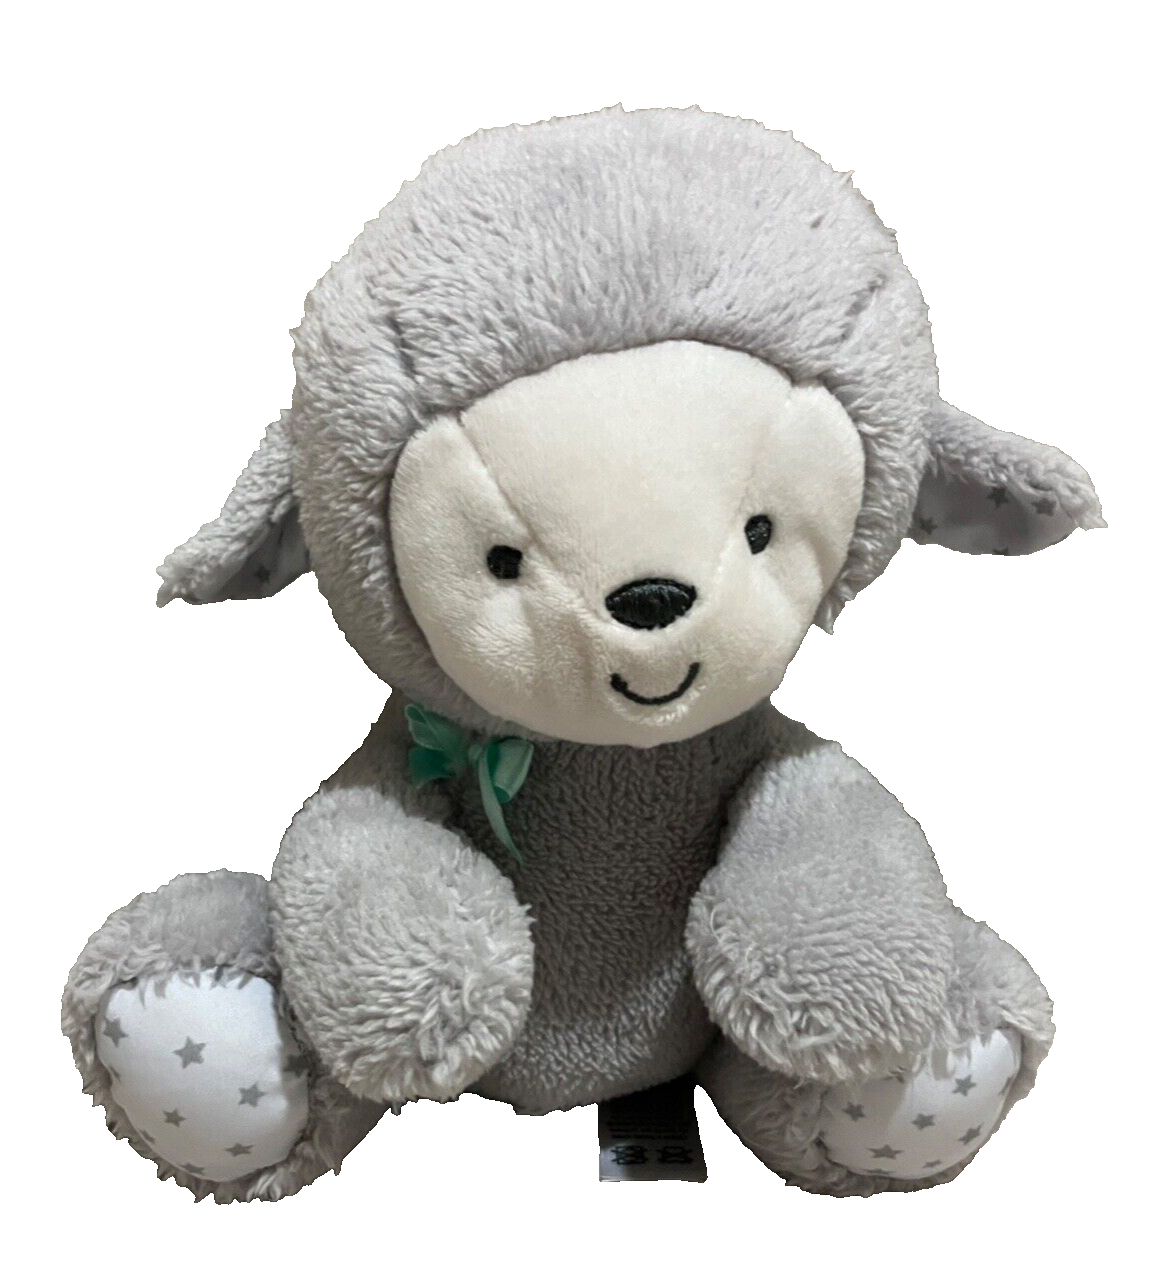 Carter's Gray Lamb Sheep Musical Crib Baby Plush Just One You Toy 8 inch Video - $12.83